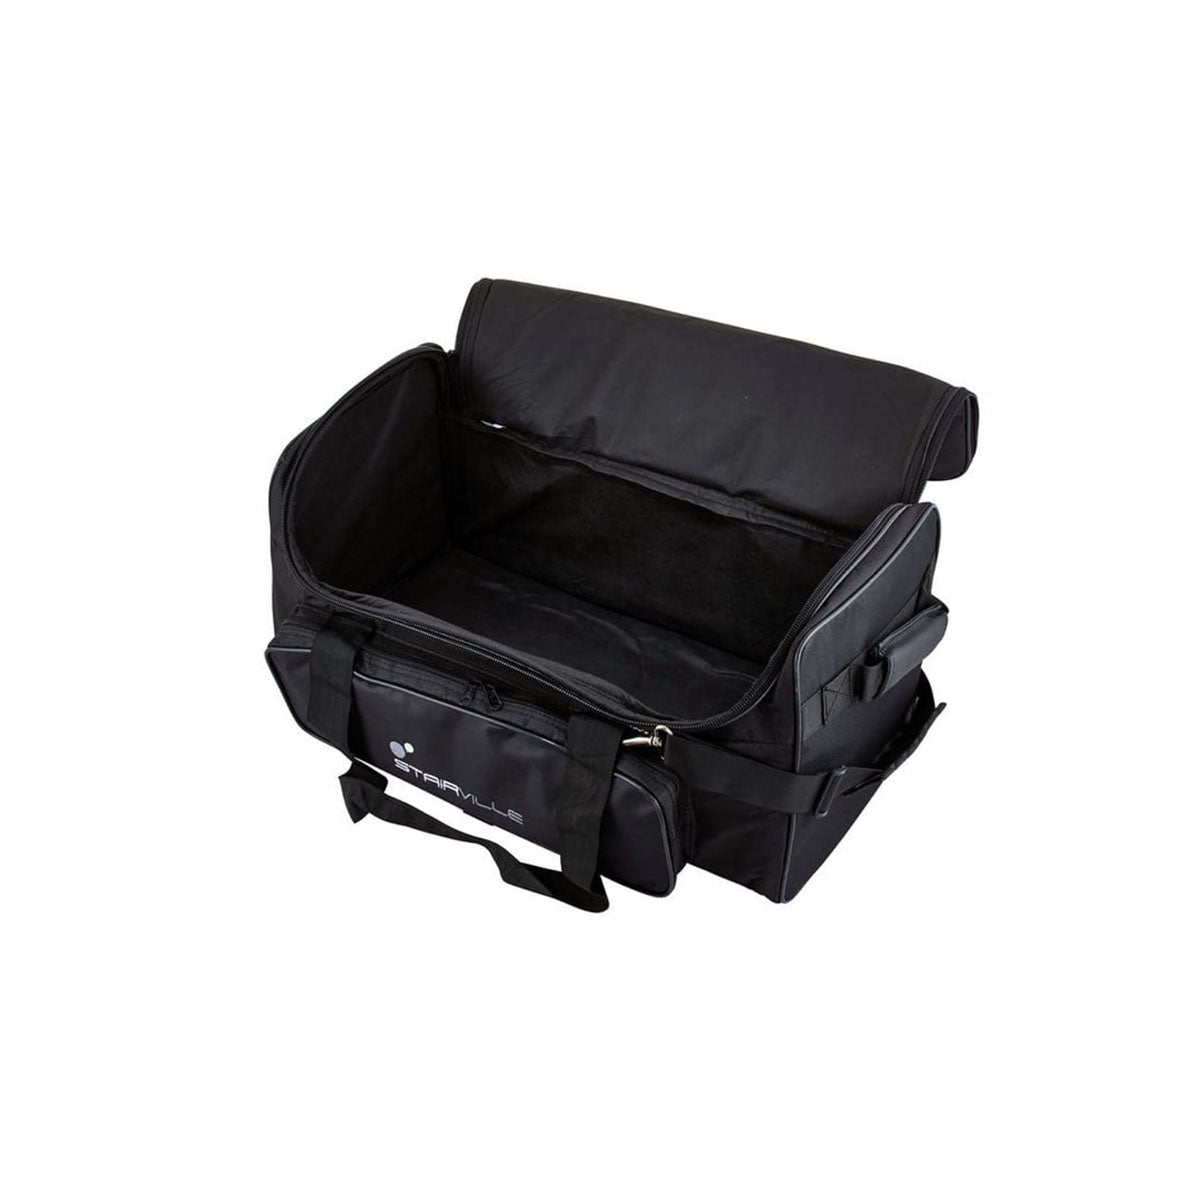 Stairville Kit Bag (SB-140) - For Coaches/Clubs